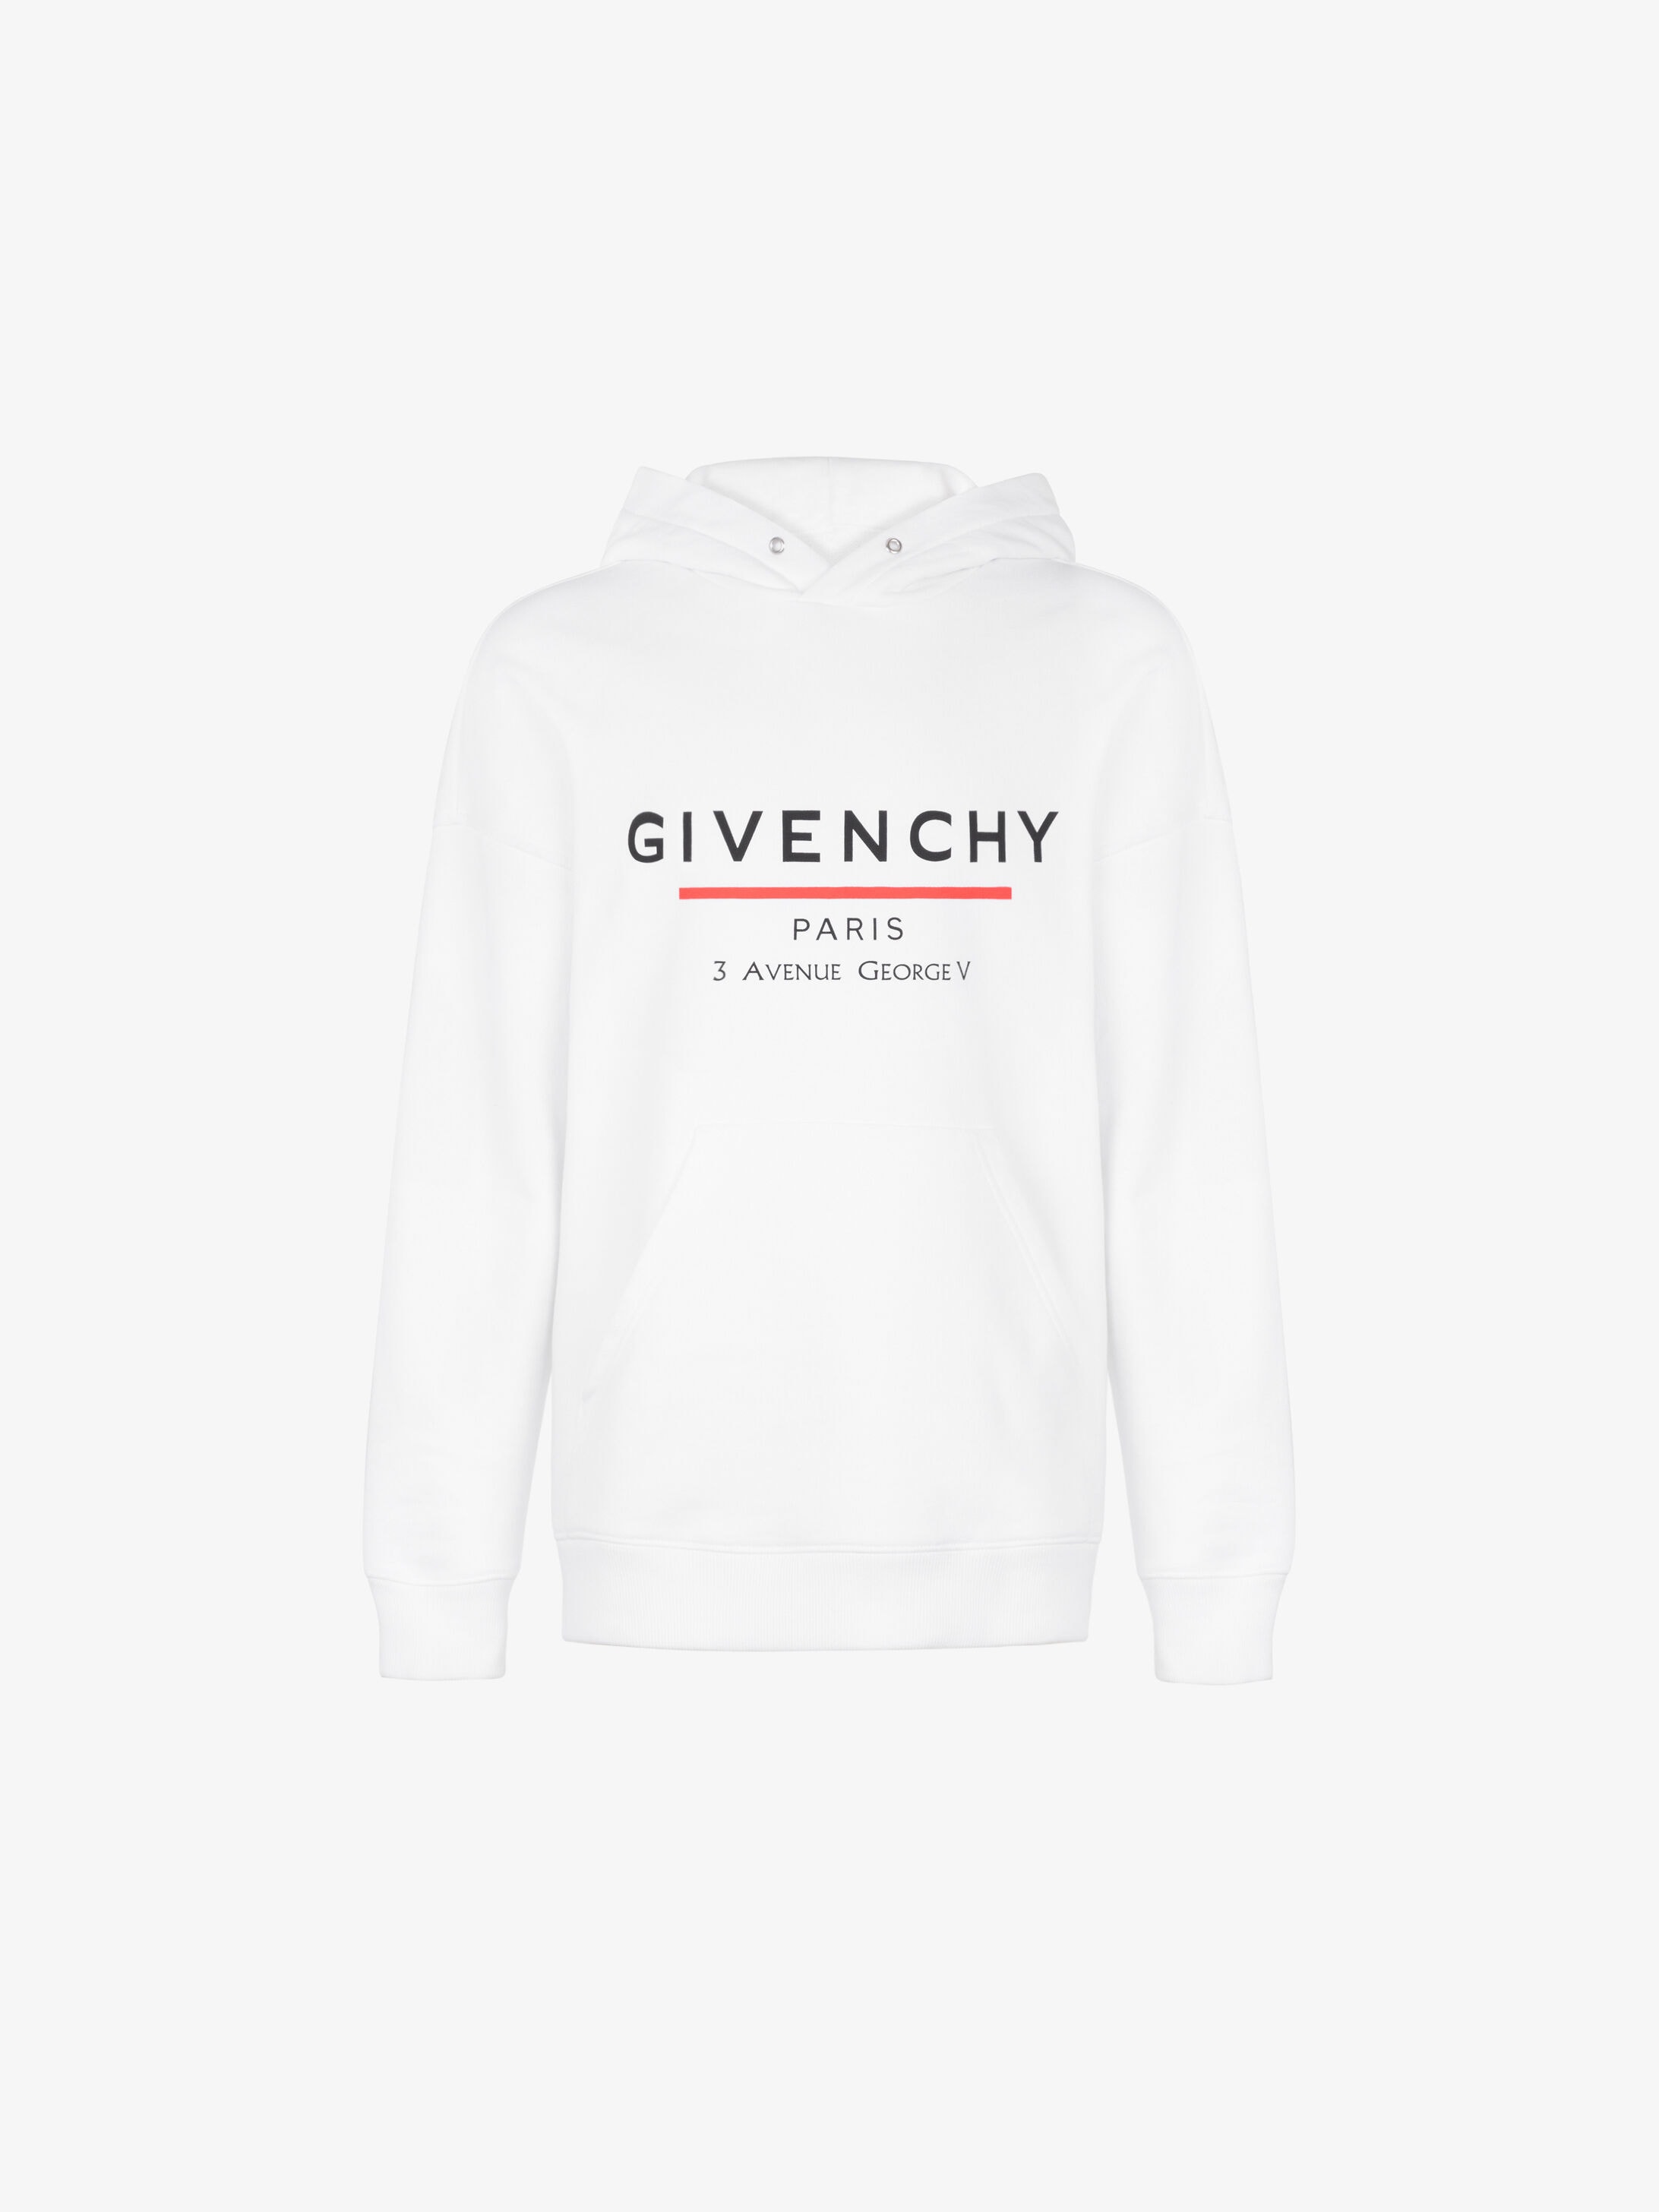 GIVENCHY LABEL hoodie | GIVENCHY Paris